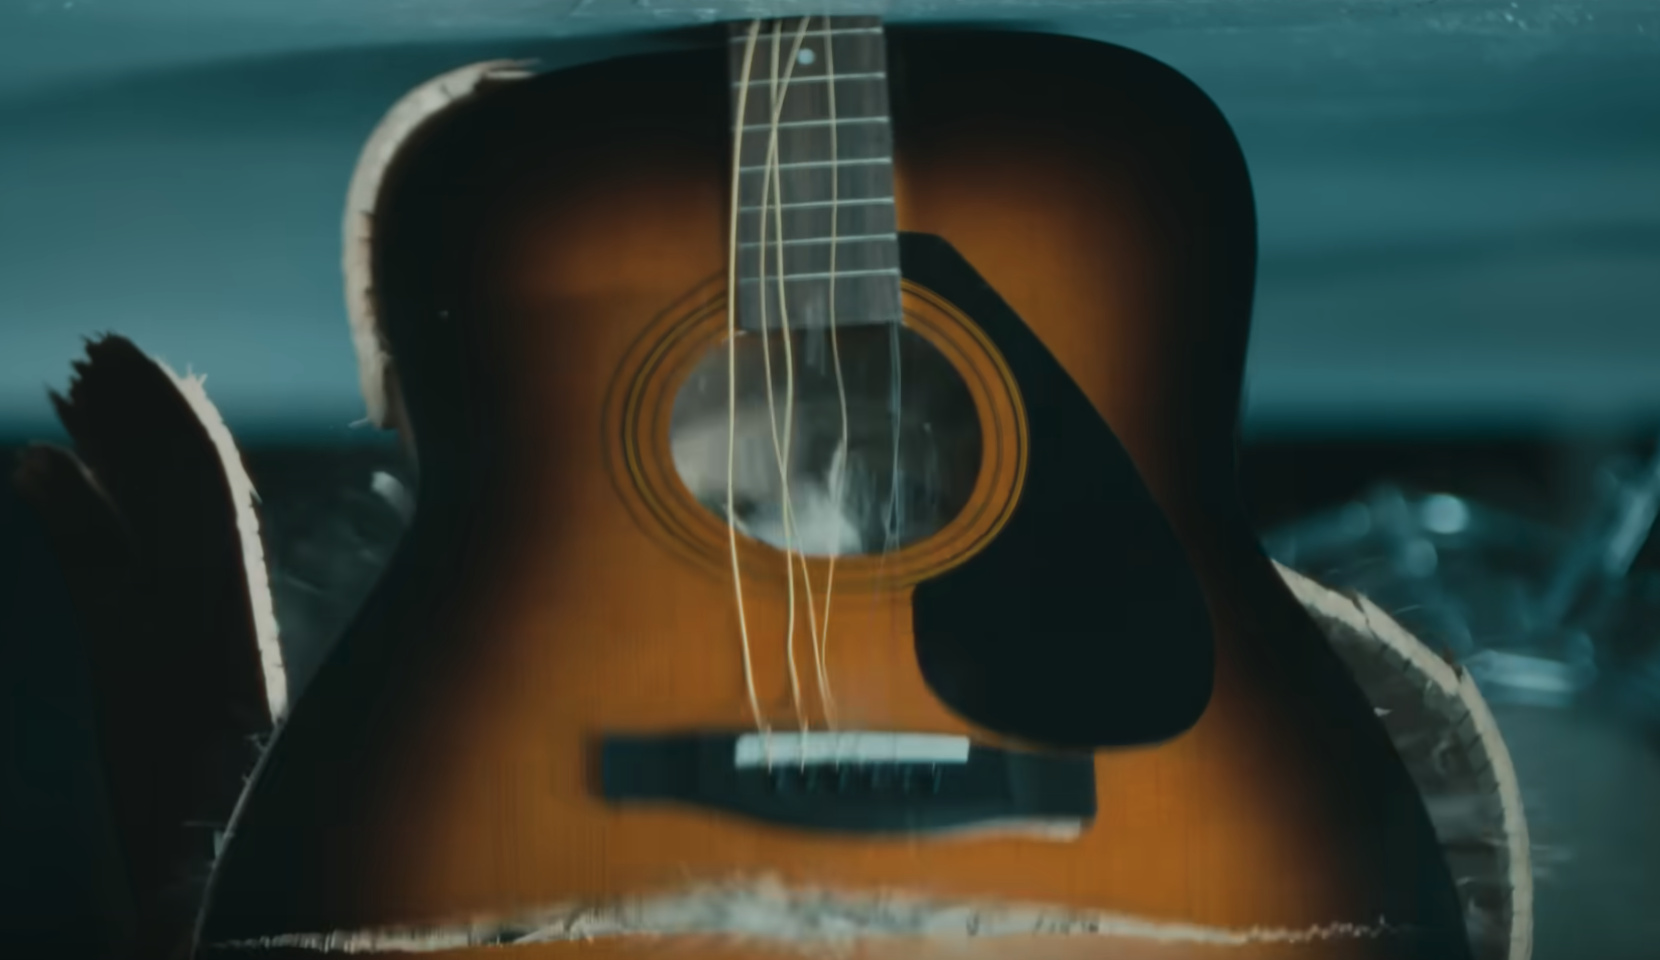 A beautiful acoustic guitar being crushed by a hydraulic press in an Apple ad.